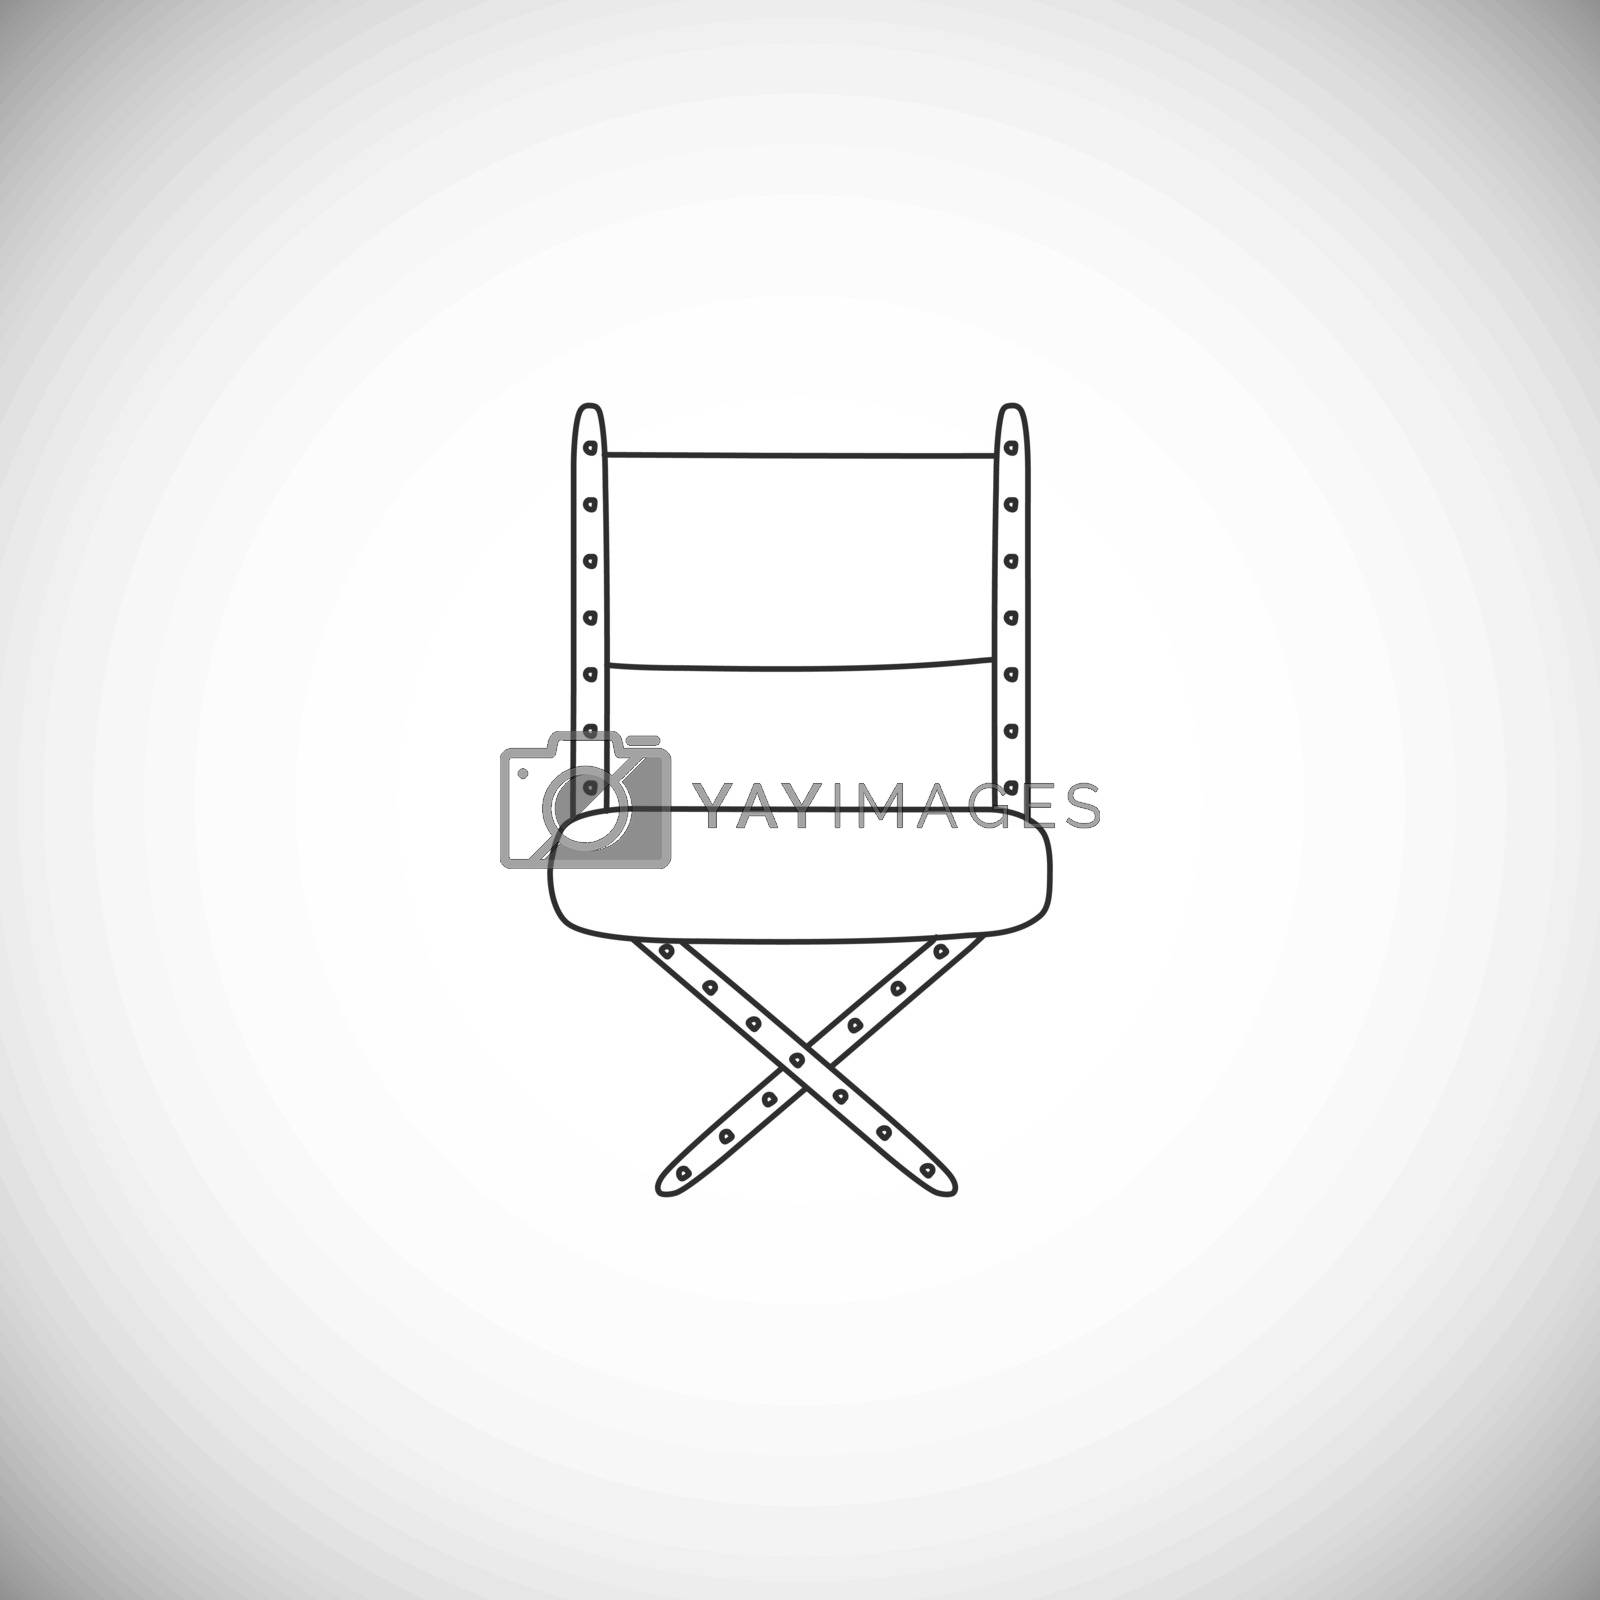 Royalty free image of Operator chair icon in line style for different design. by kantrika